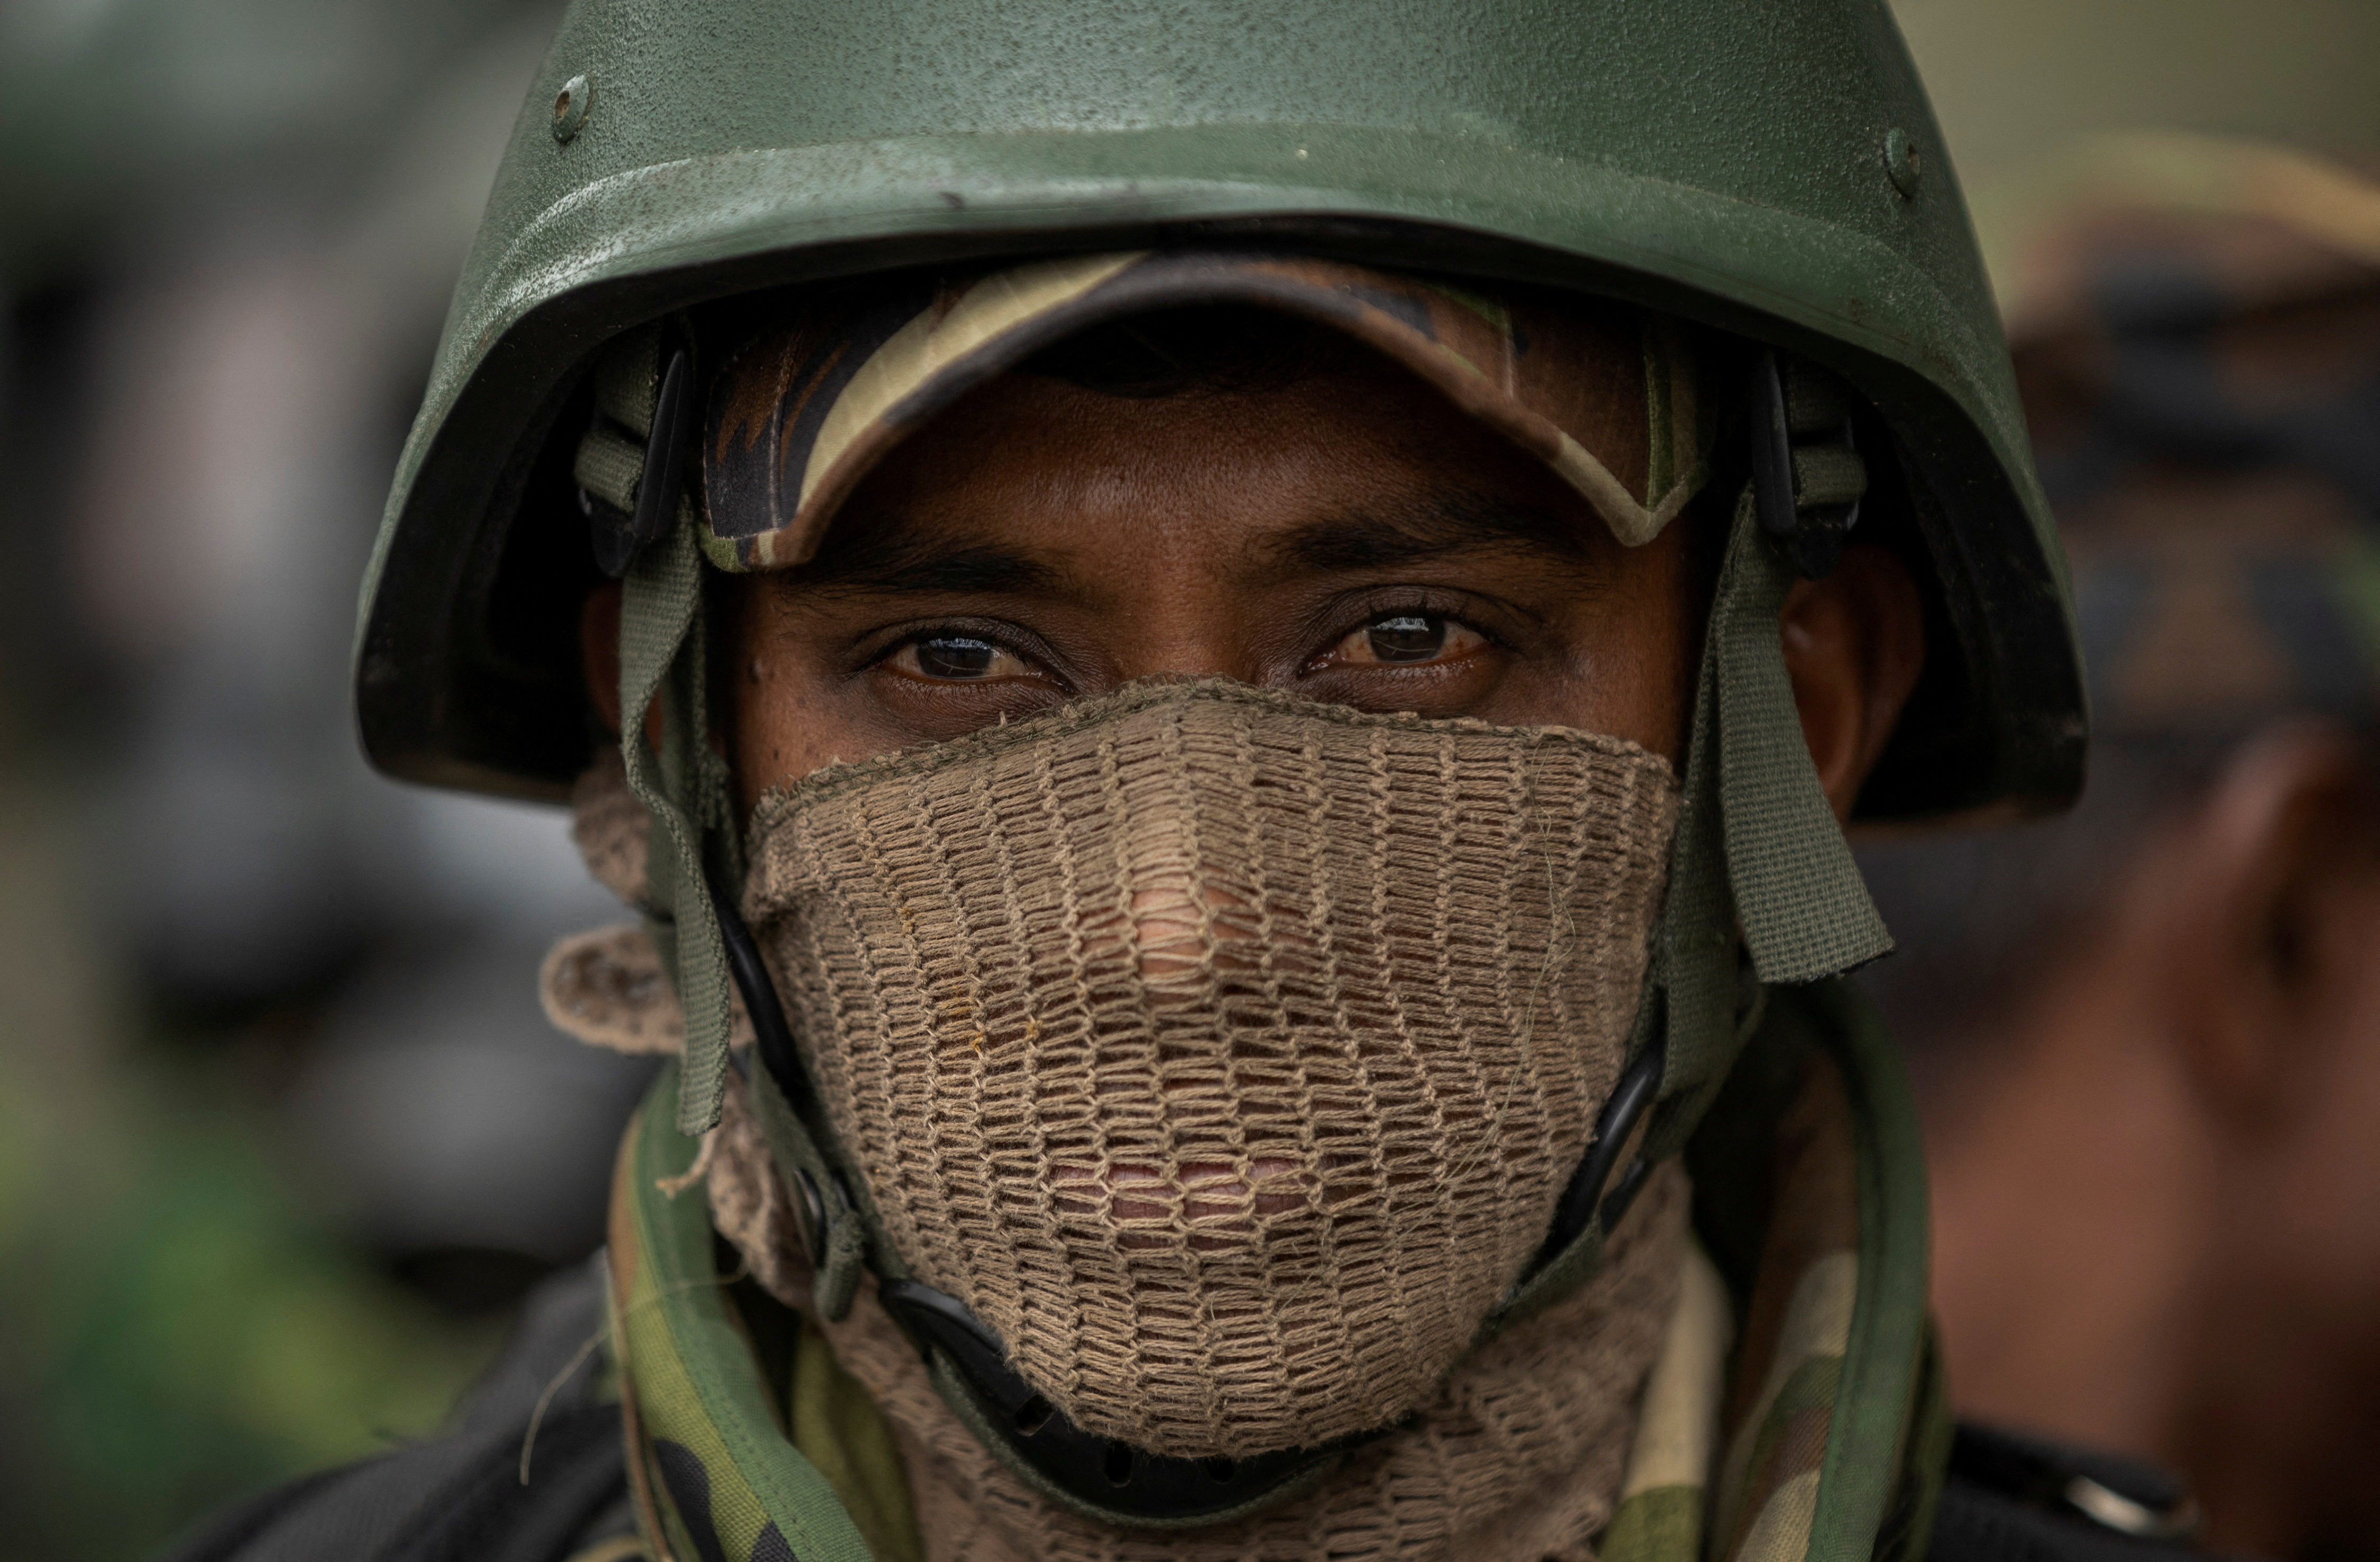 Security personnel stand guard during a protest near the Presidential Secretariat in Colombo